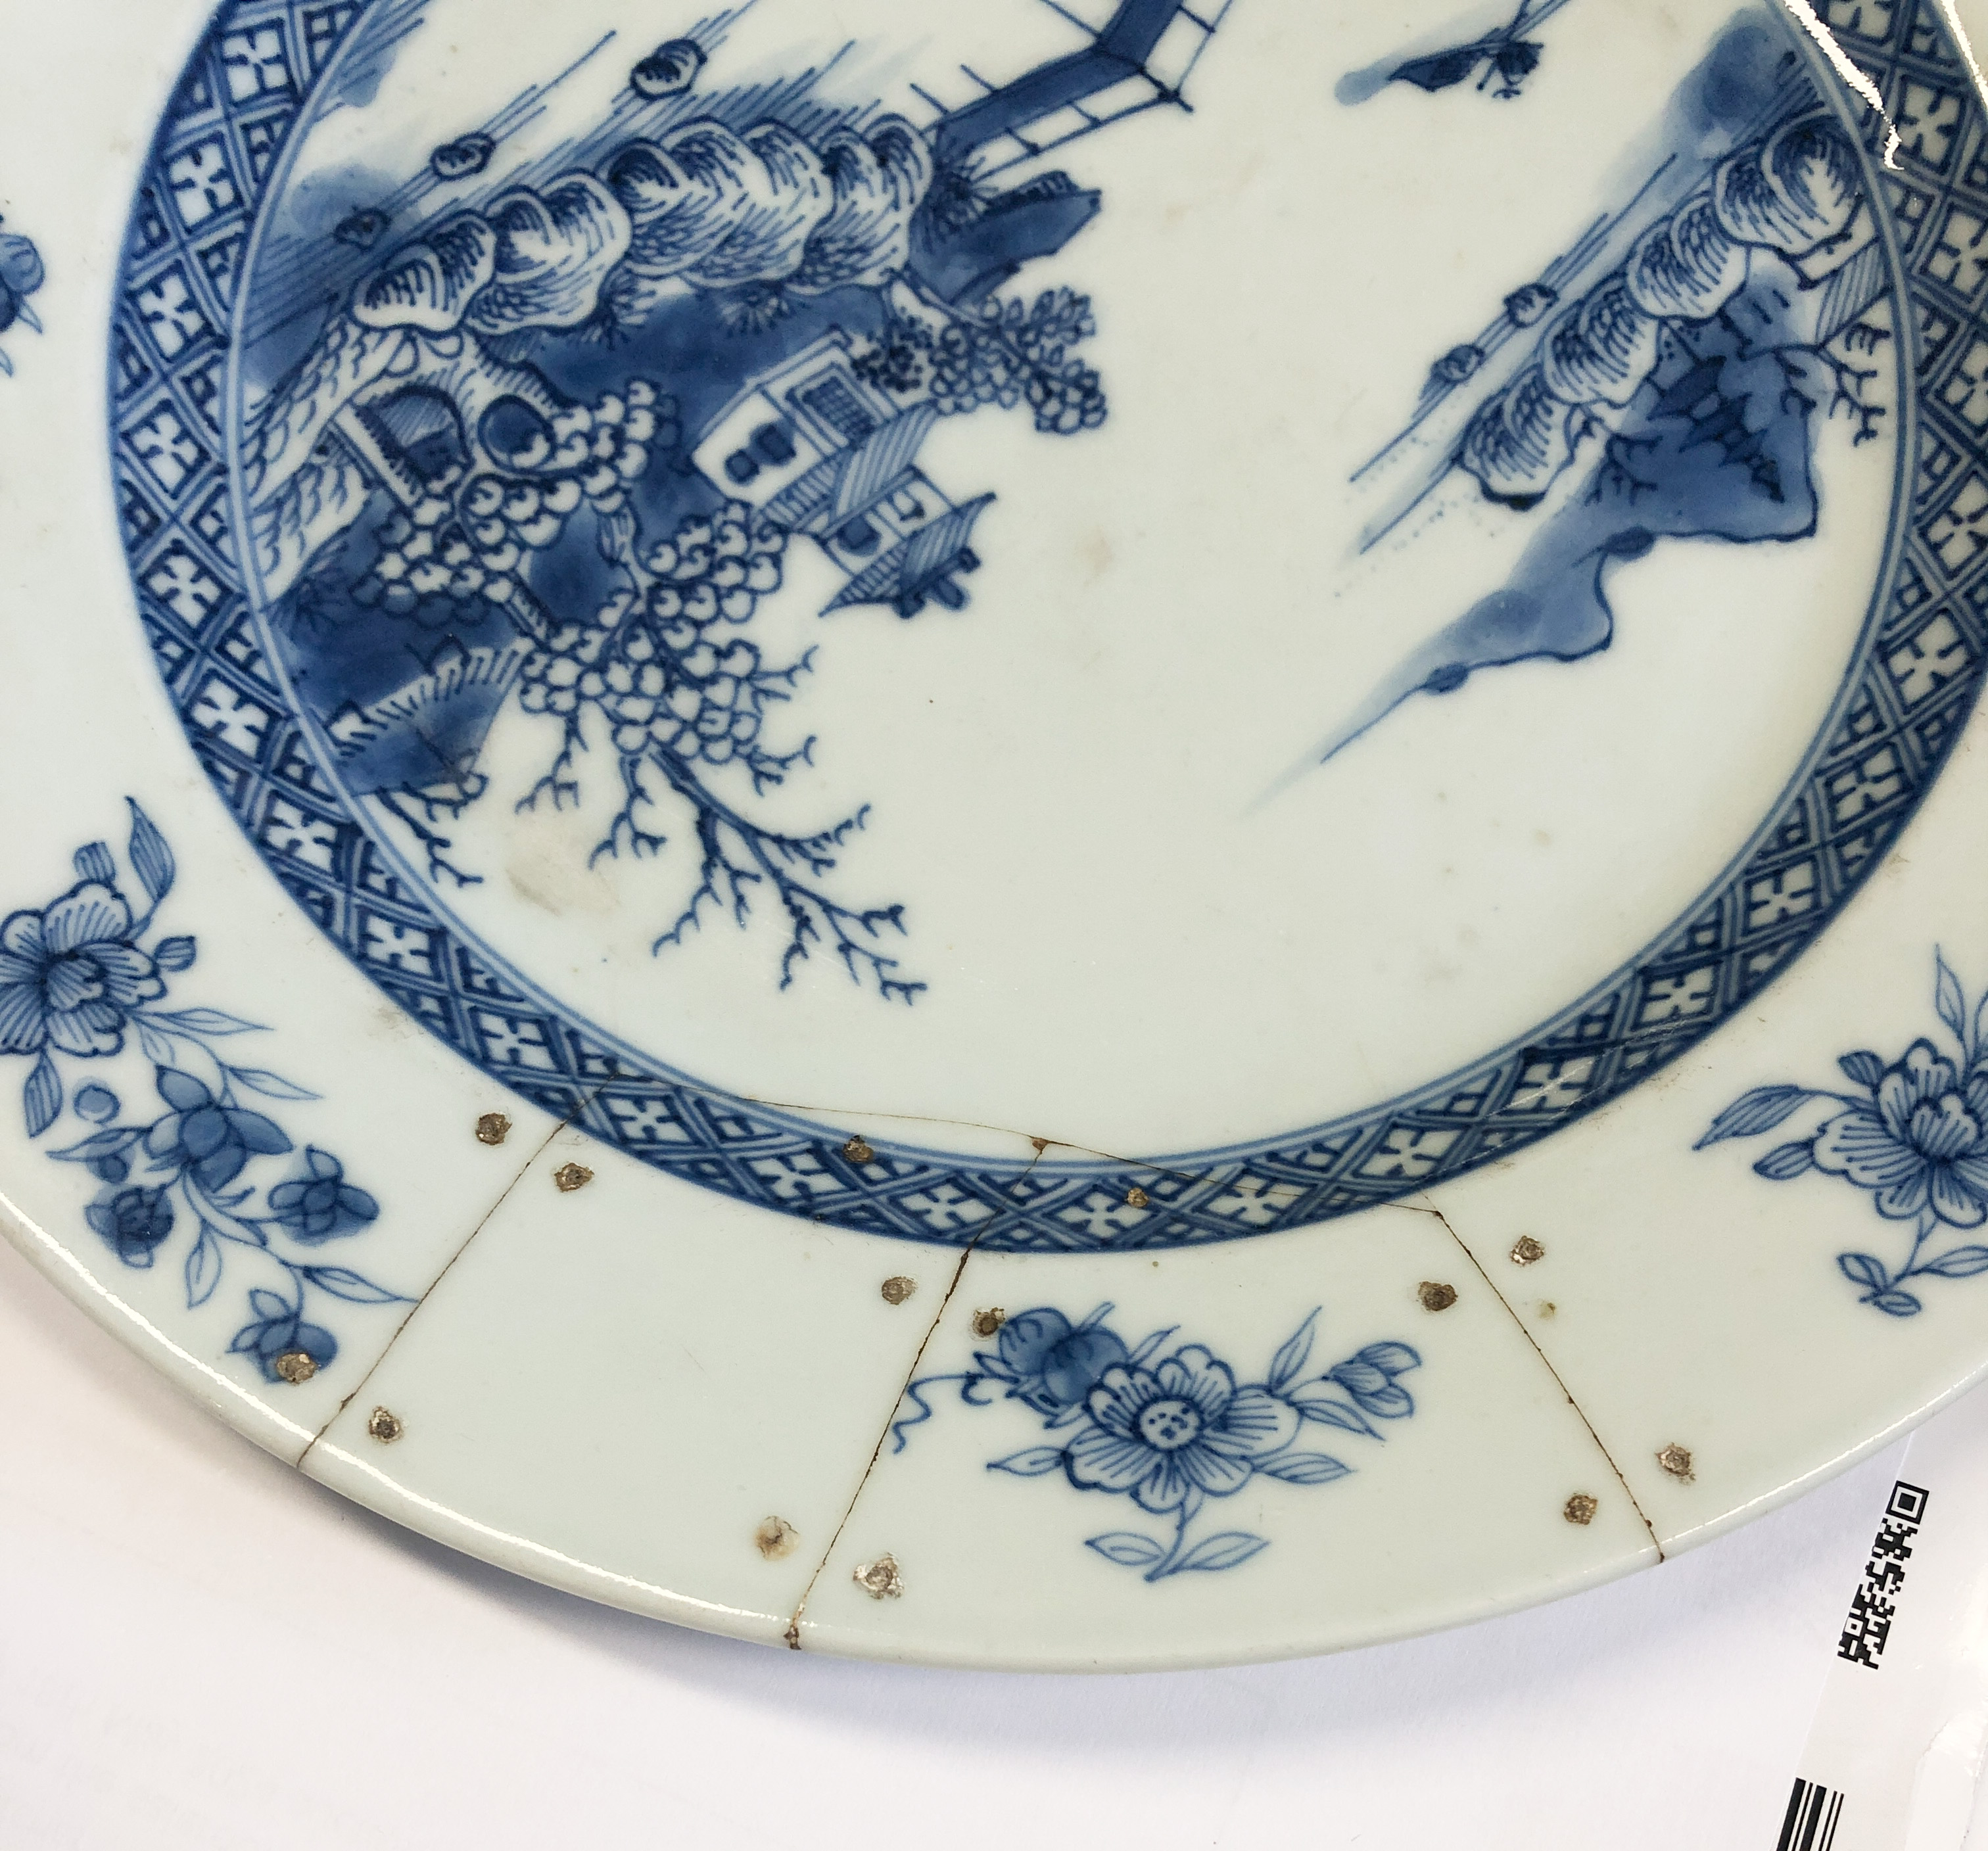 Eight Chinese export porcelain blue and white plates and octagonal platters - late 18th / early 19th - Image 20 of 31